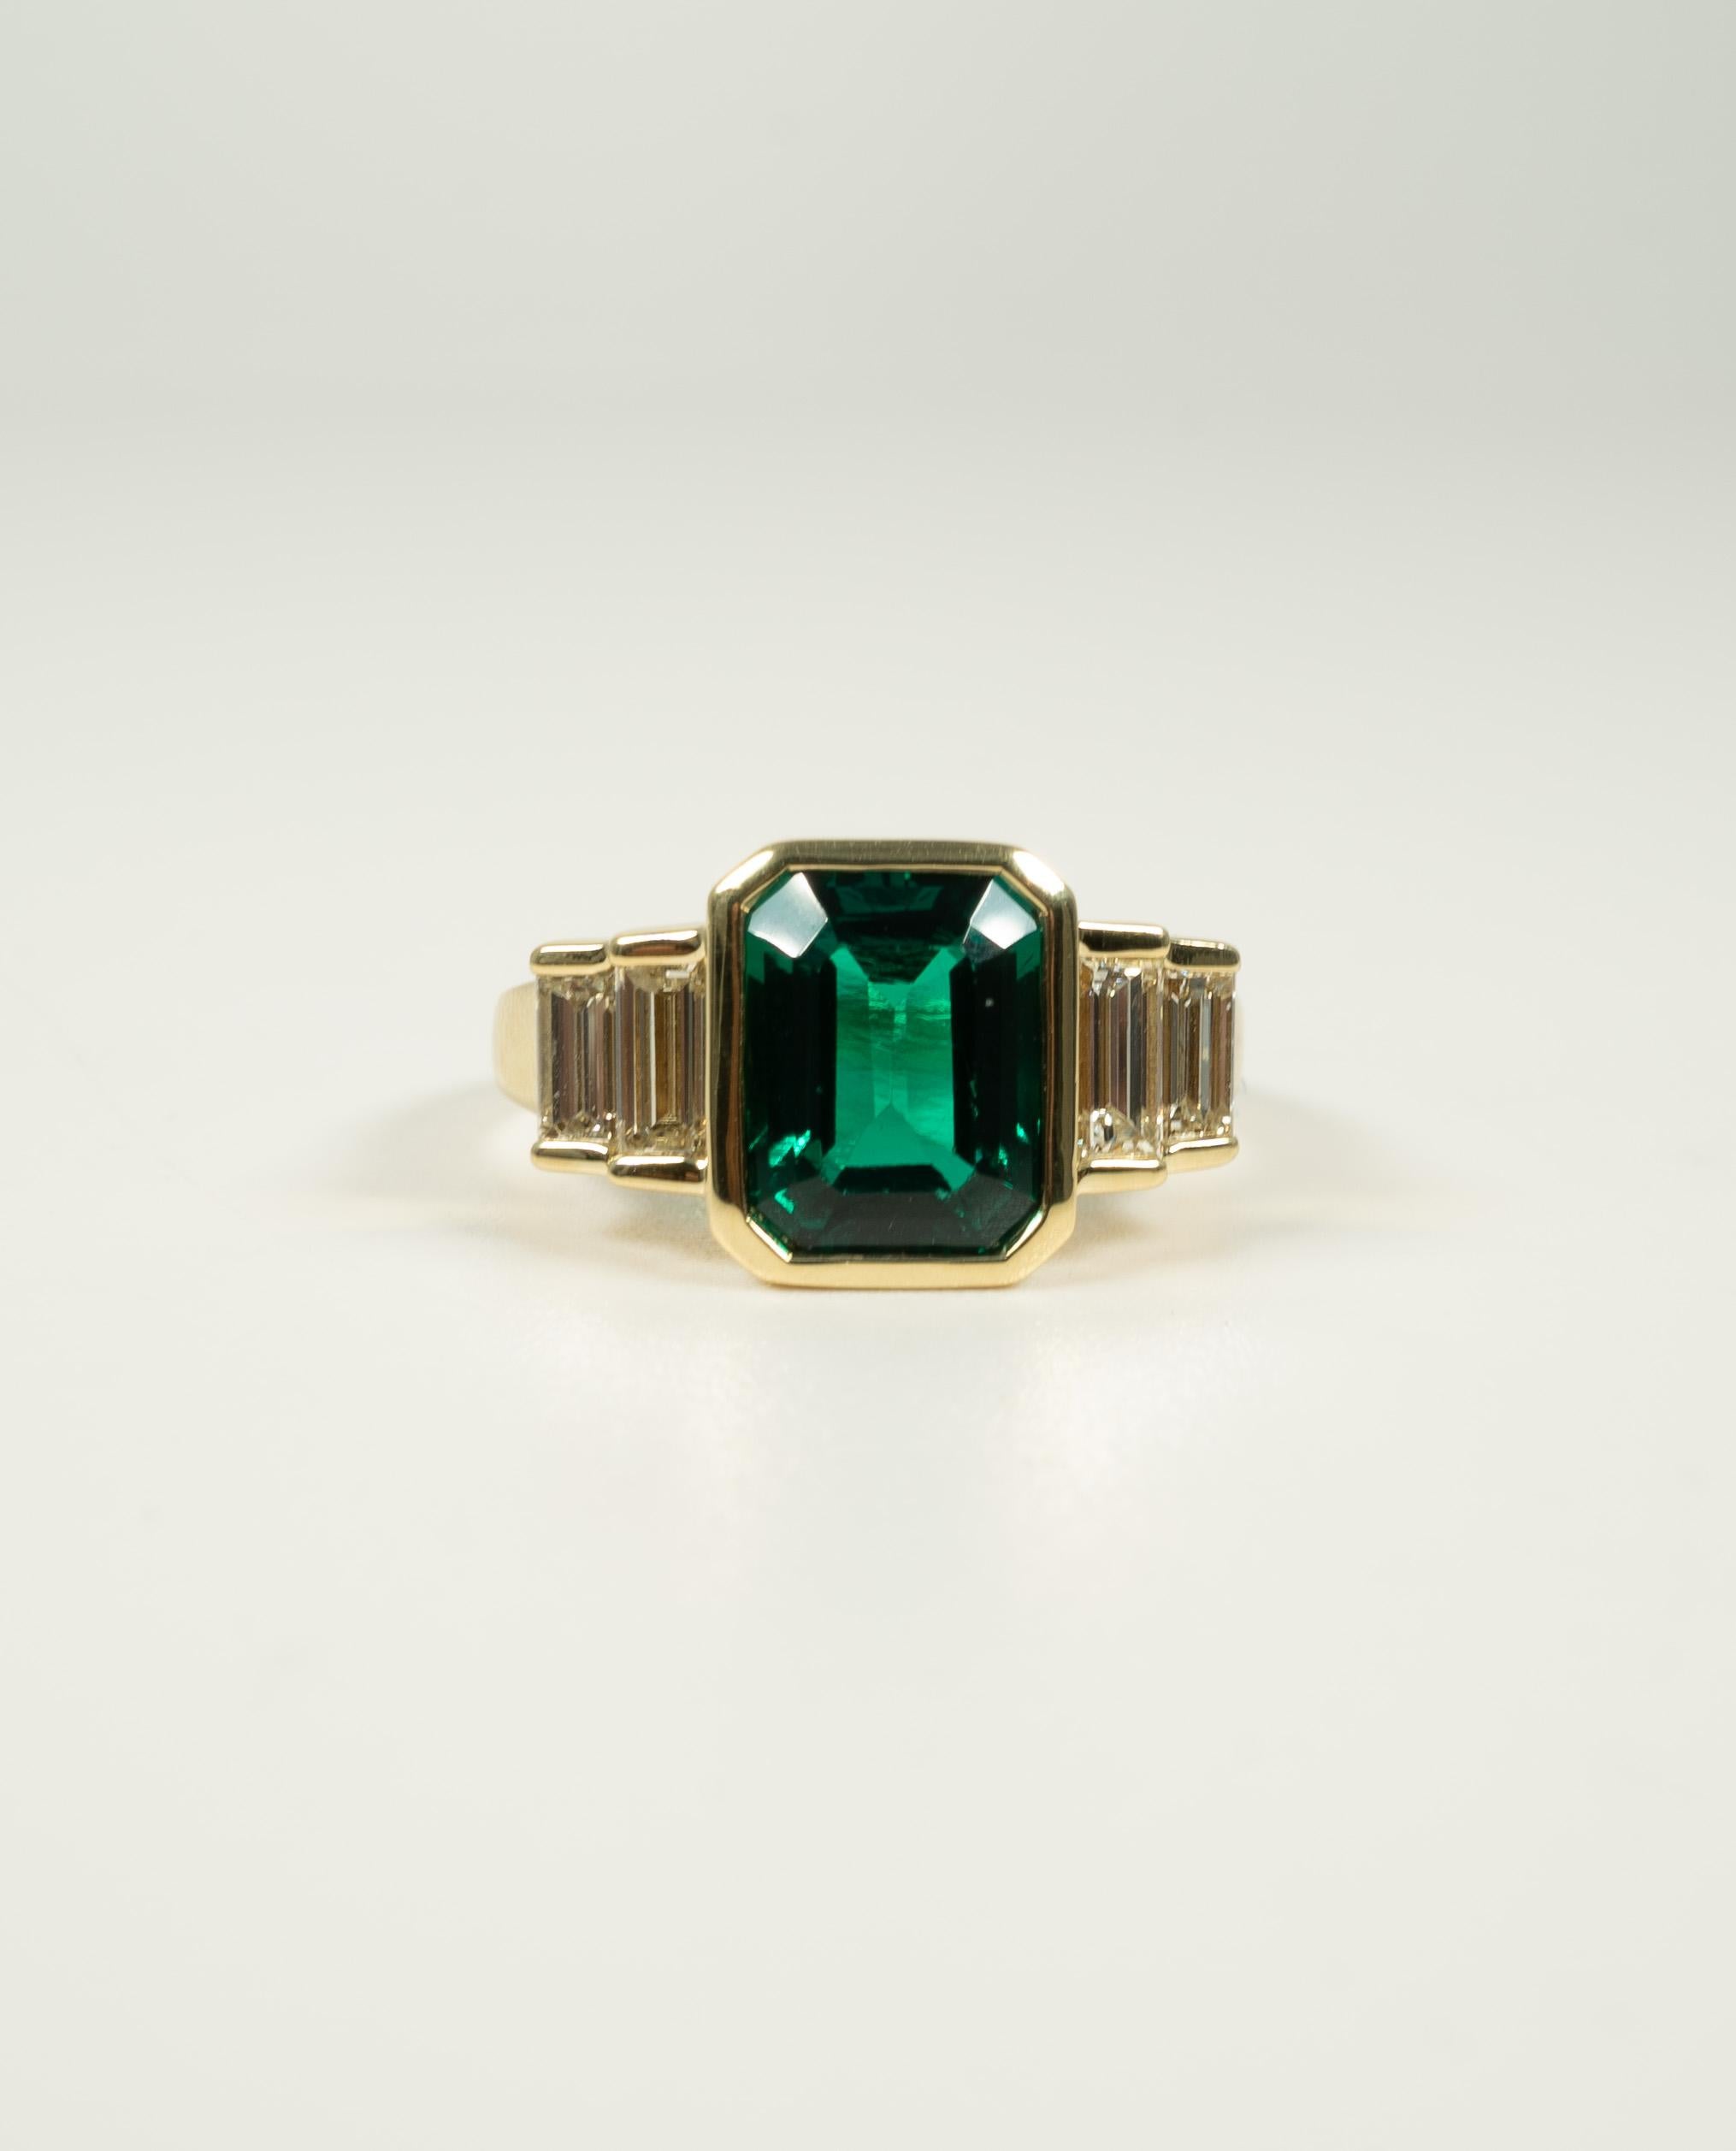 Such a stunning ring!  Centered with a bezel-set, rectangle-shaped green stone, flanked by beautiful straight baguette diamonds with an estimated total weight of 0.65 cts. 